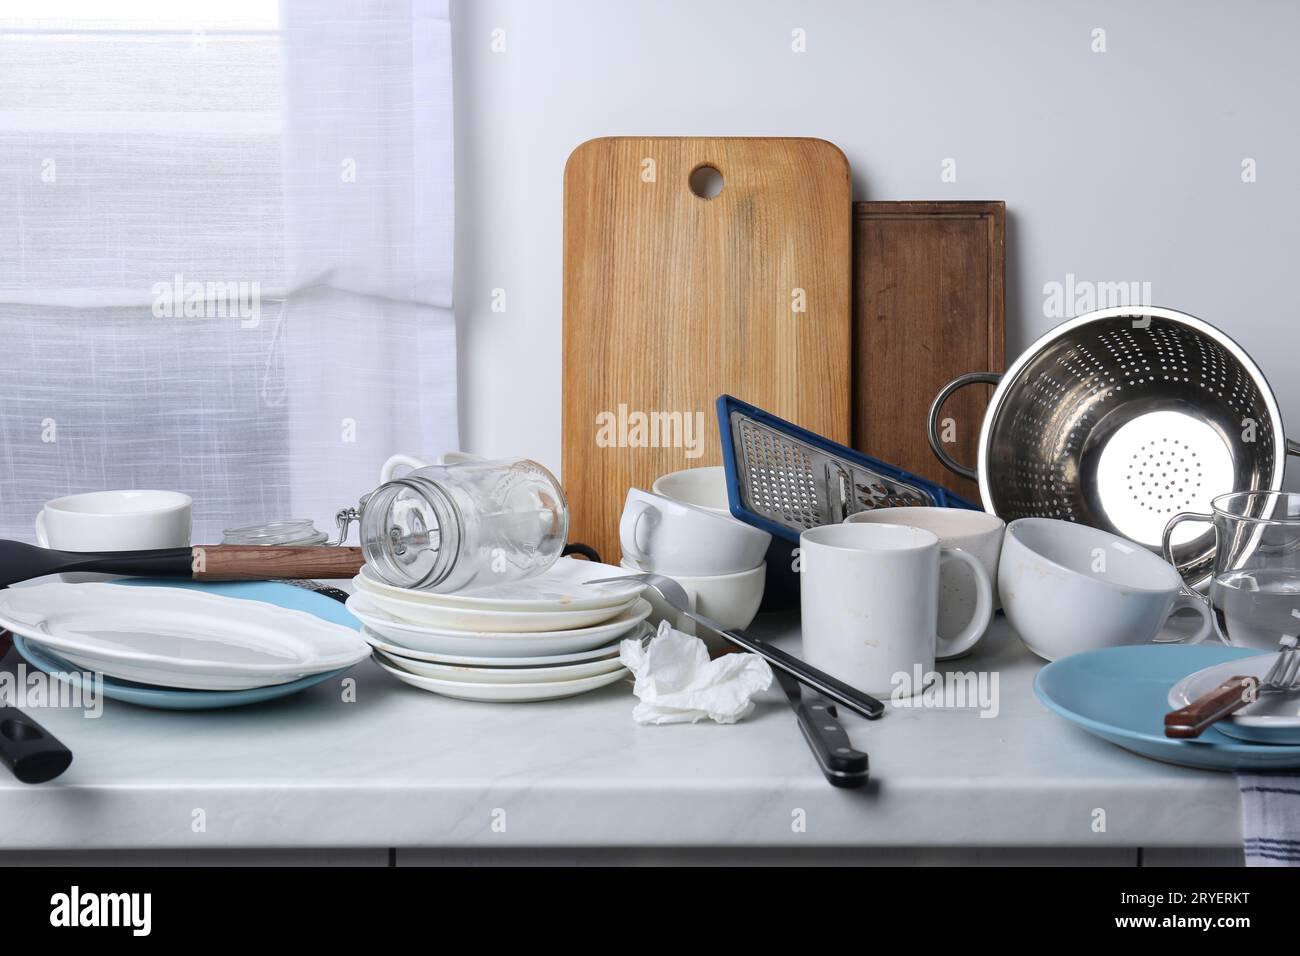 Many dirty utensils and dishware on countertop in messy kitchen Stock Photo